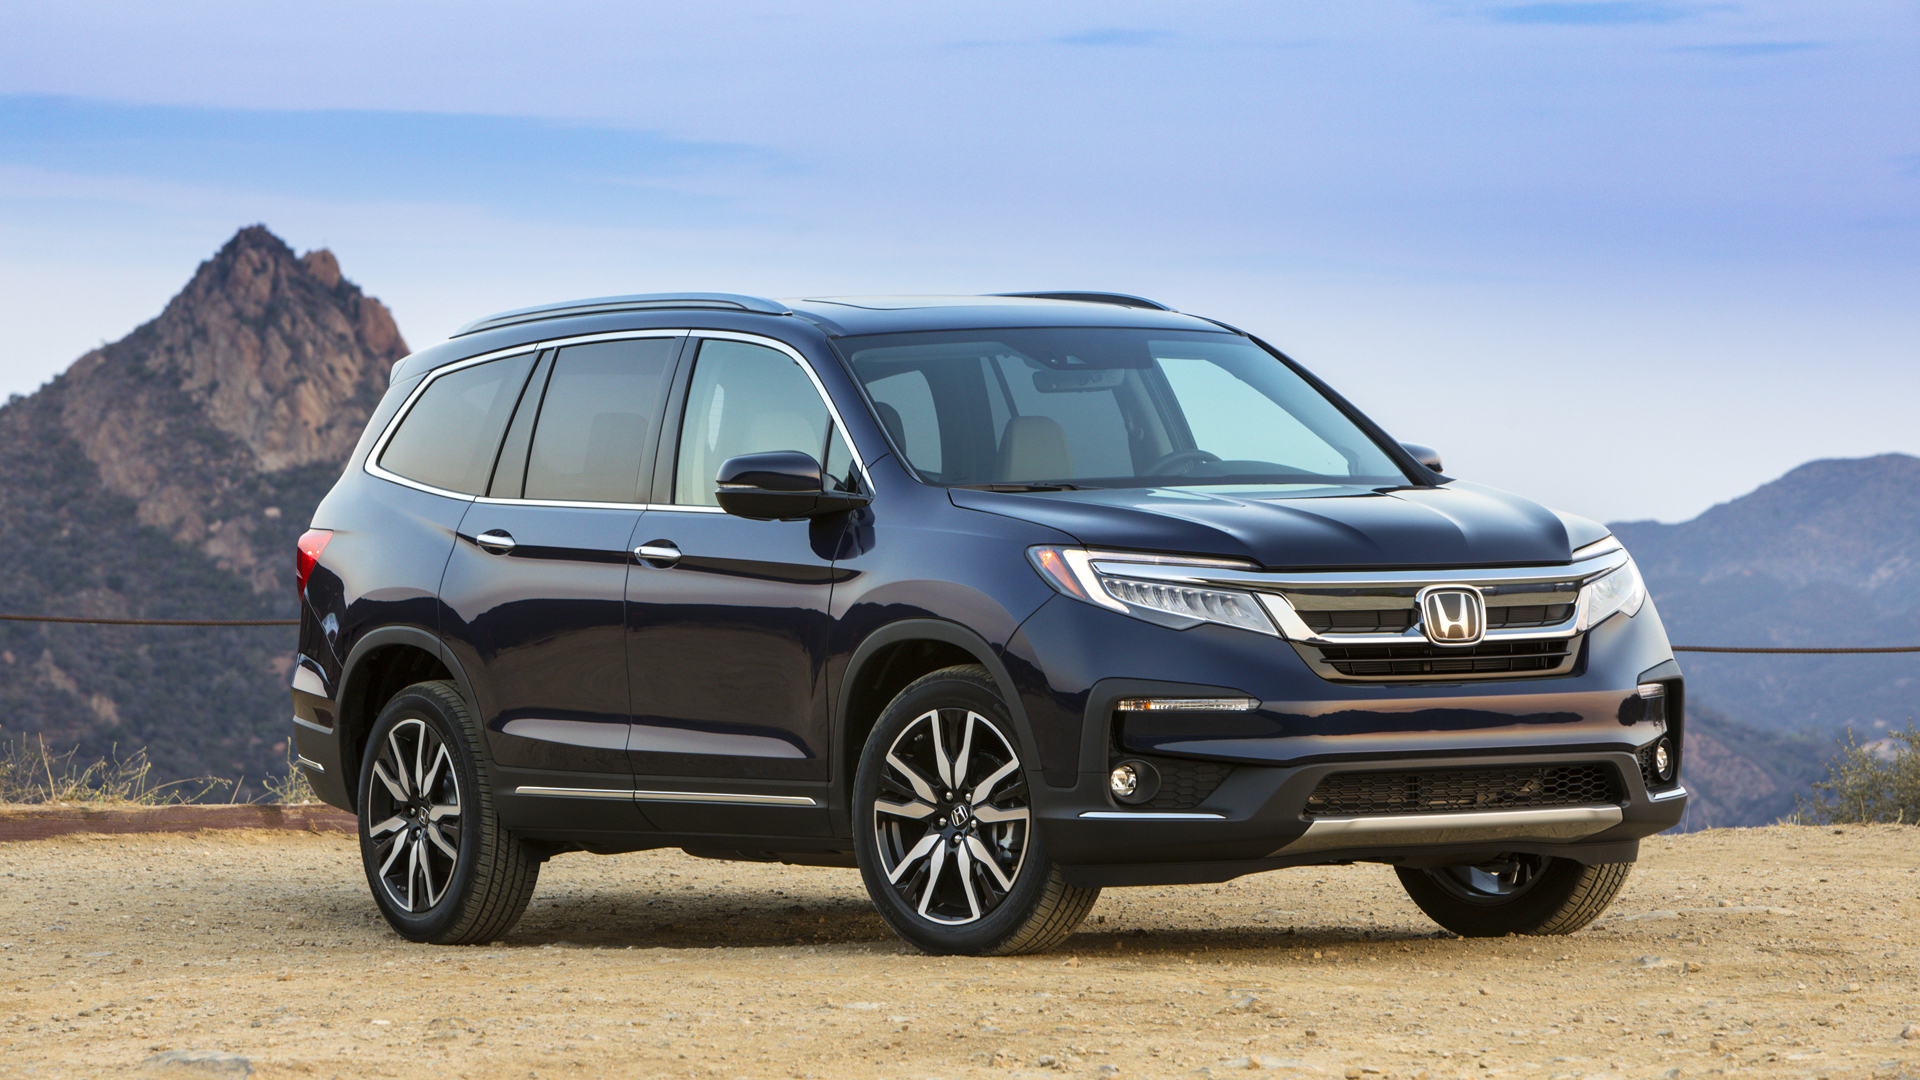 2021 Honda Pilot Review What's new, prices, fuel economy, pictures